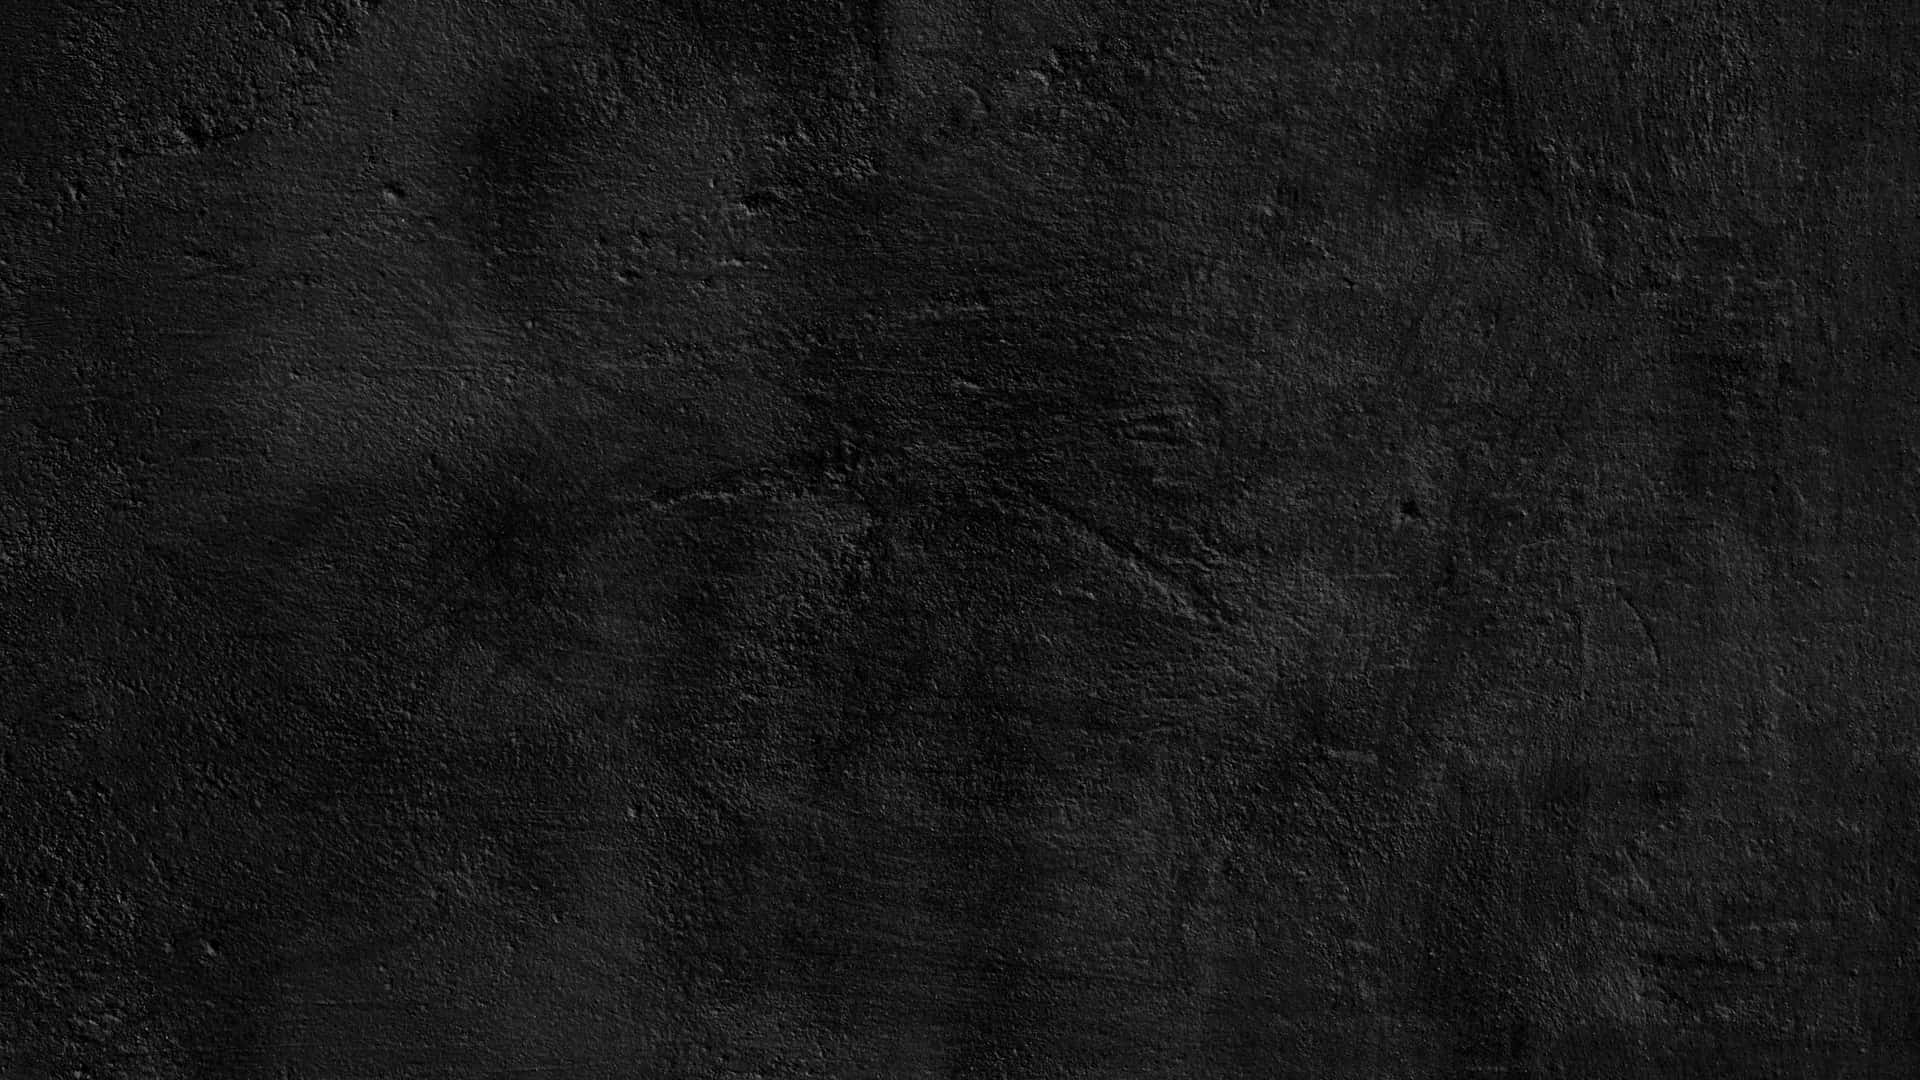 Dark grunge texture with distressed, faded effect. Wallpaper